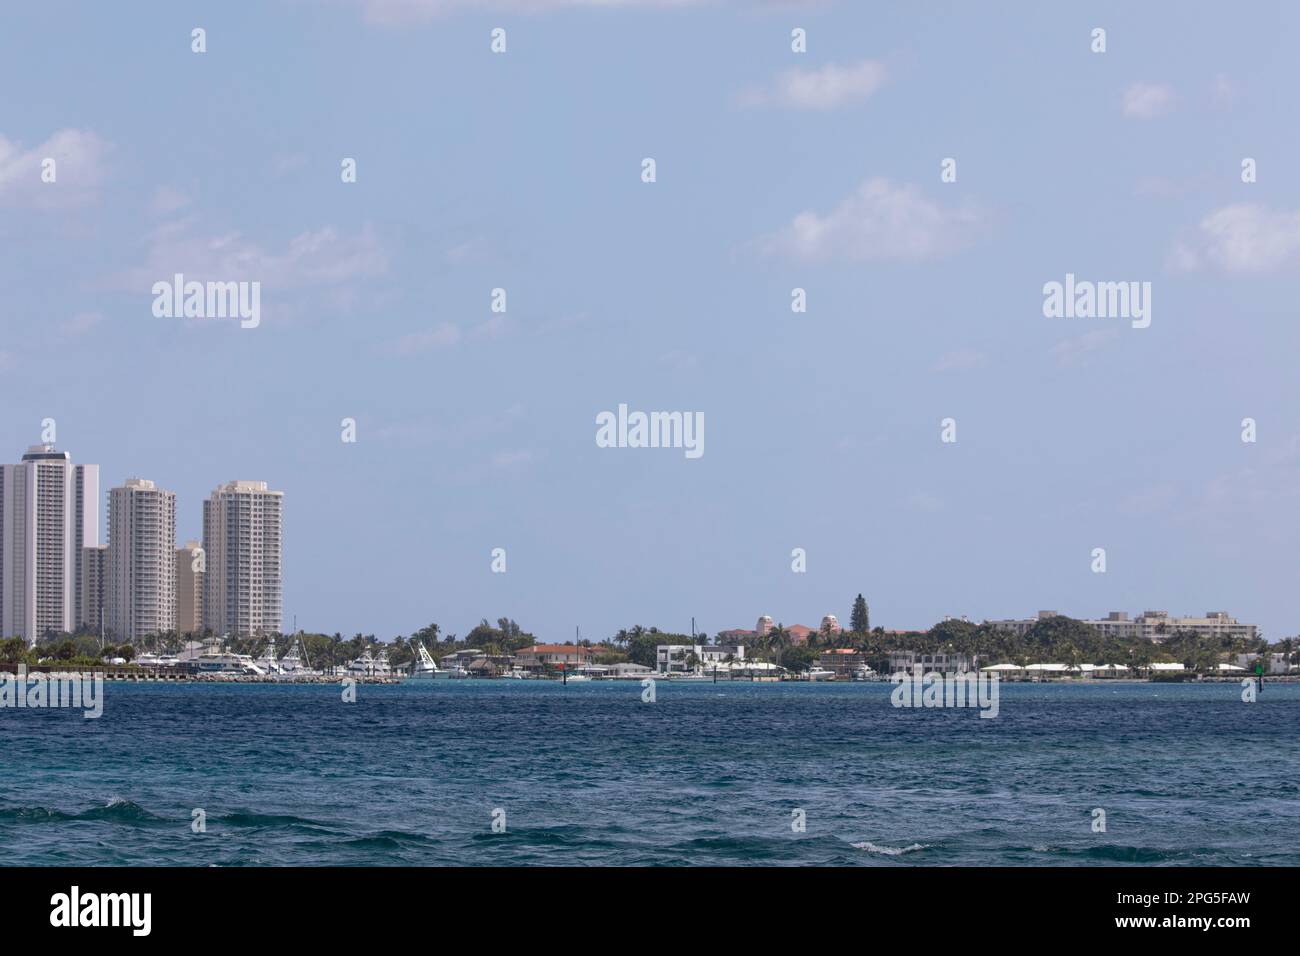 Clear day and view across beautiful Lake Worth Lagoon from Manatee Lagoon in Palm Beach County, Florida, United States Stock Photo